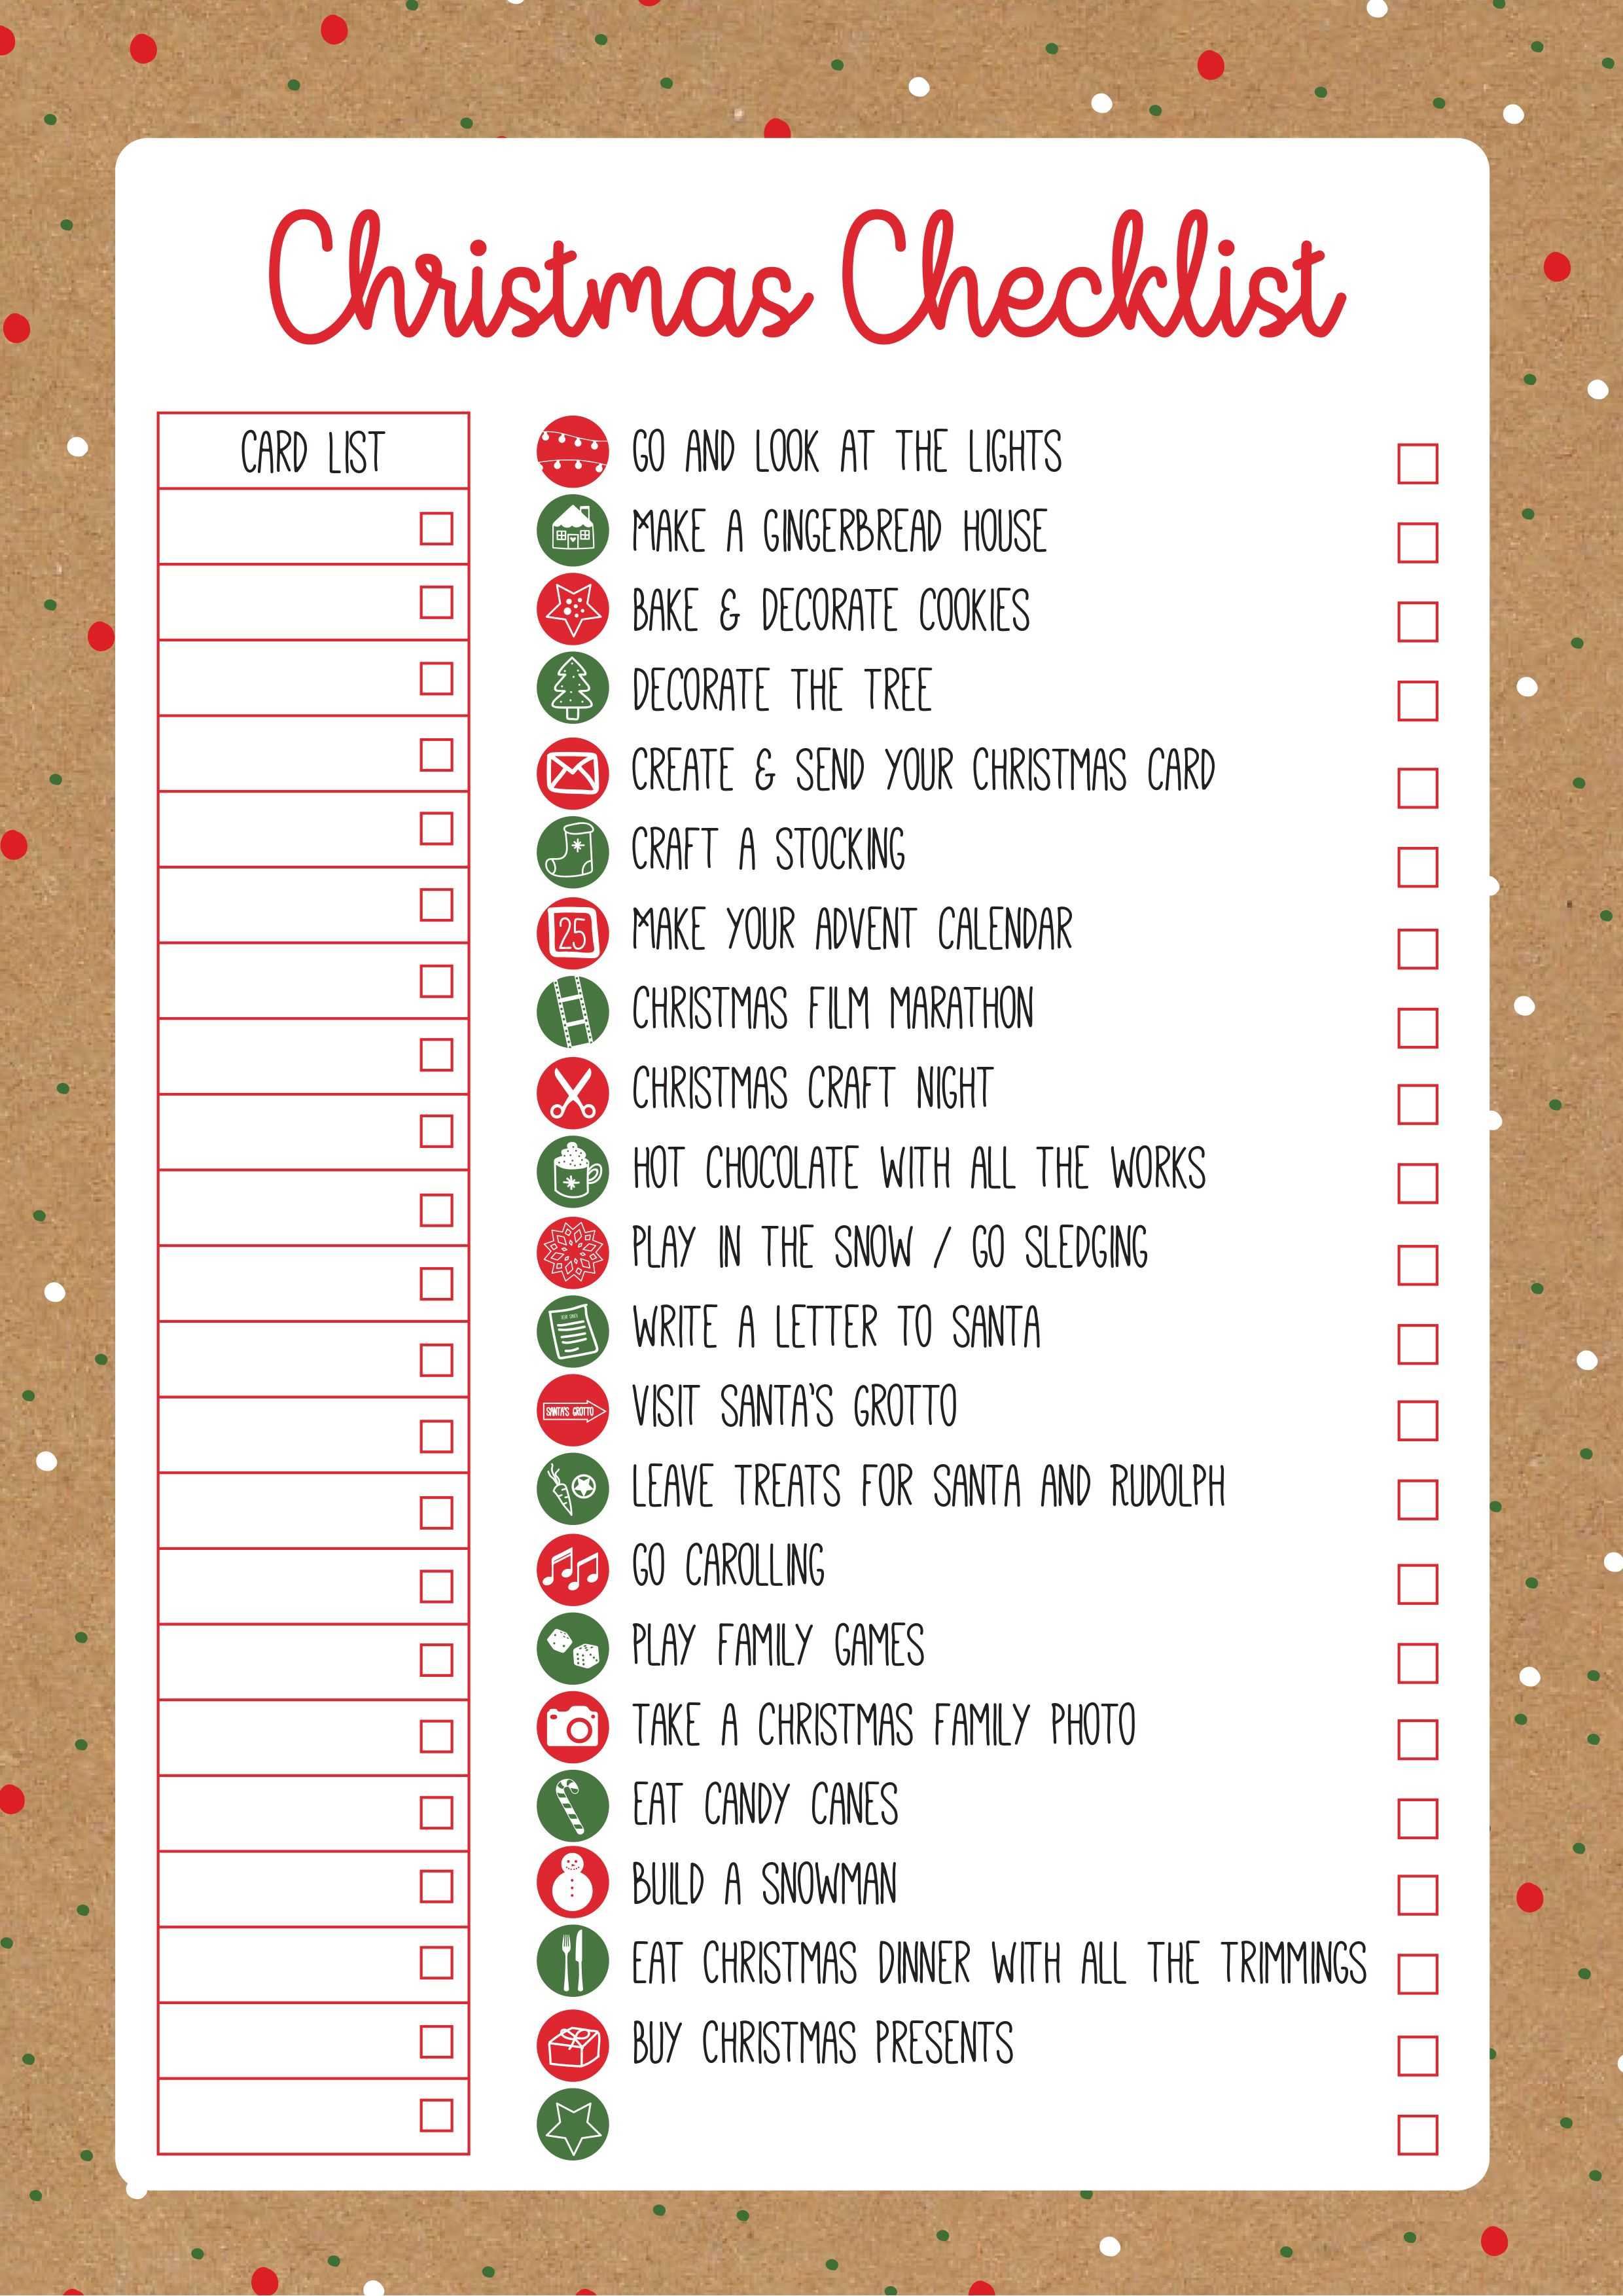 Christmas Checklist Template | Event Planning | Christmas Throughout Christmas Card List Template